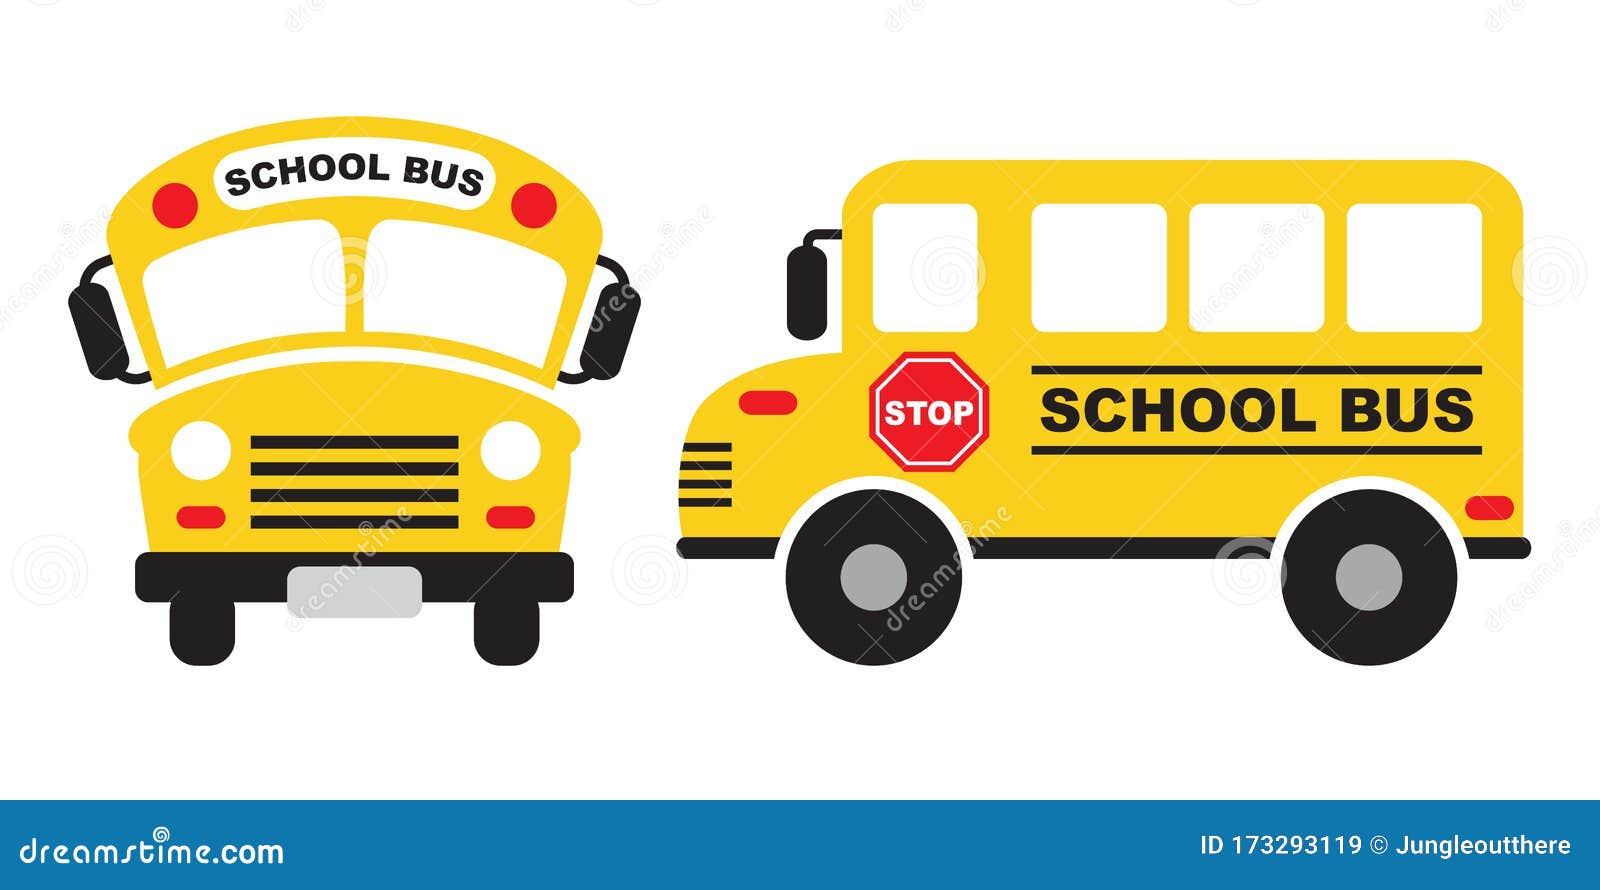 school bus front and side view